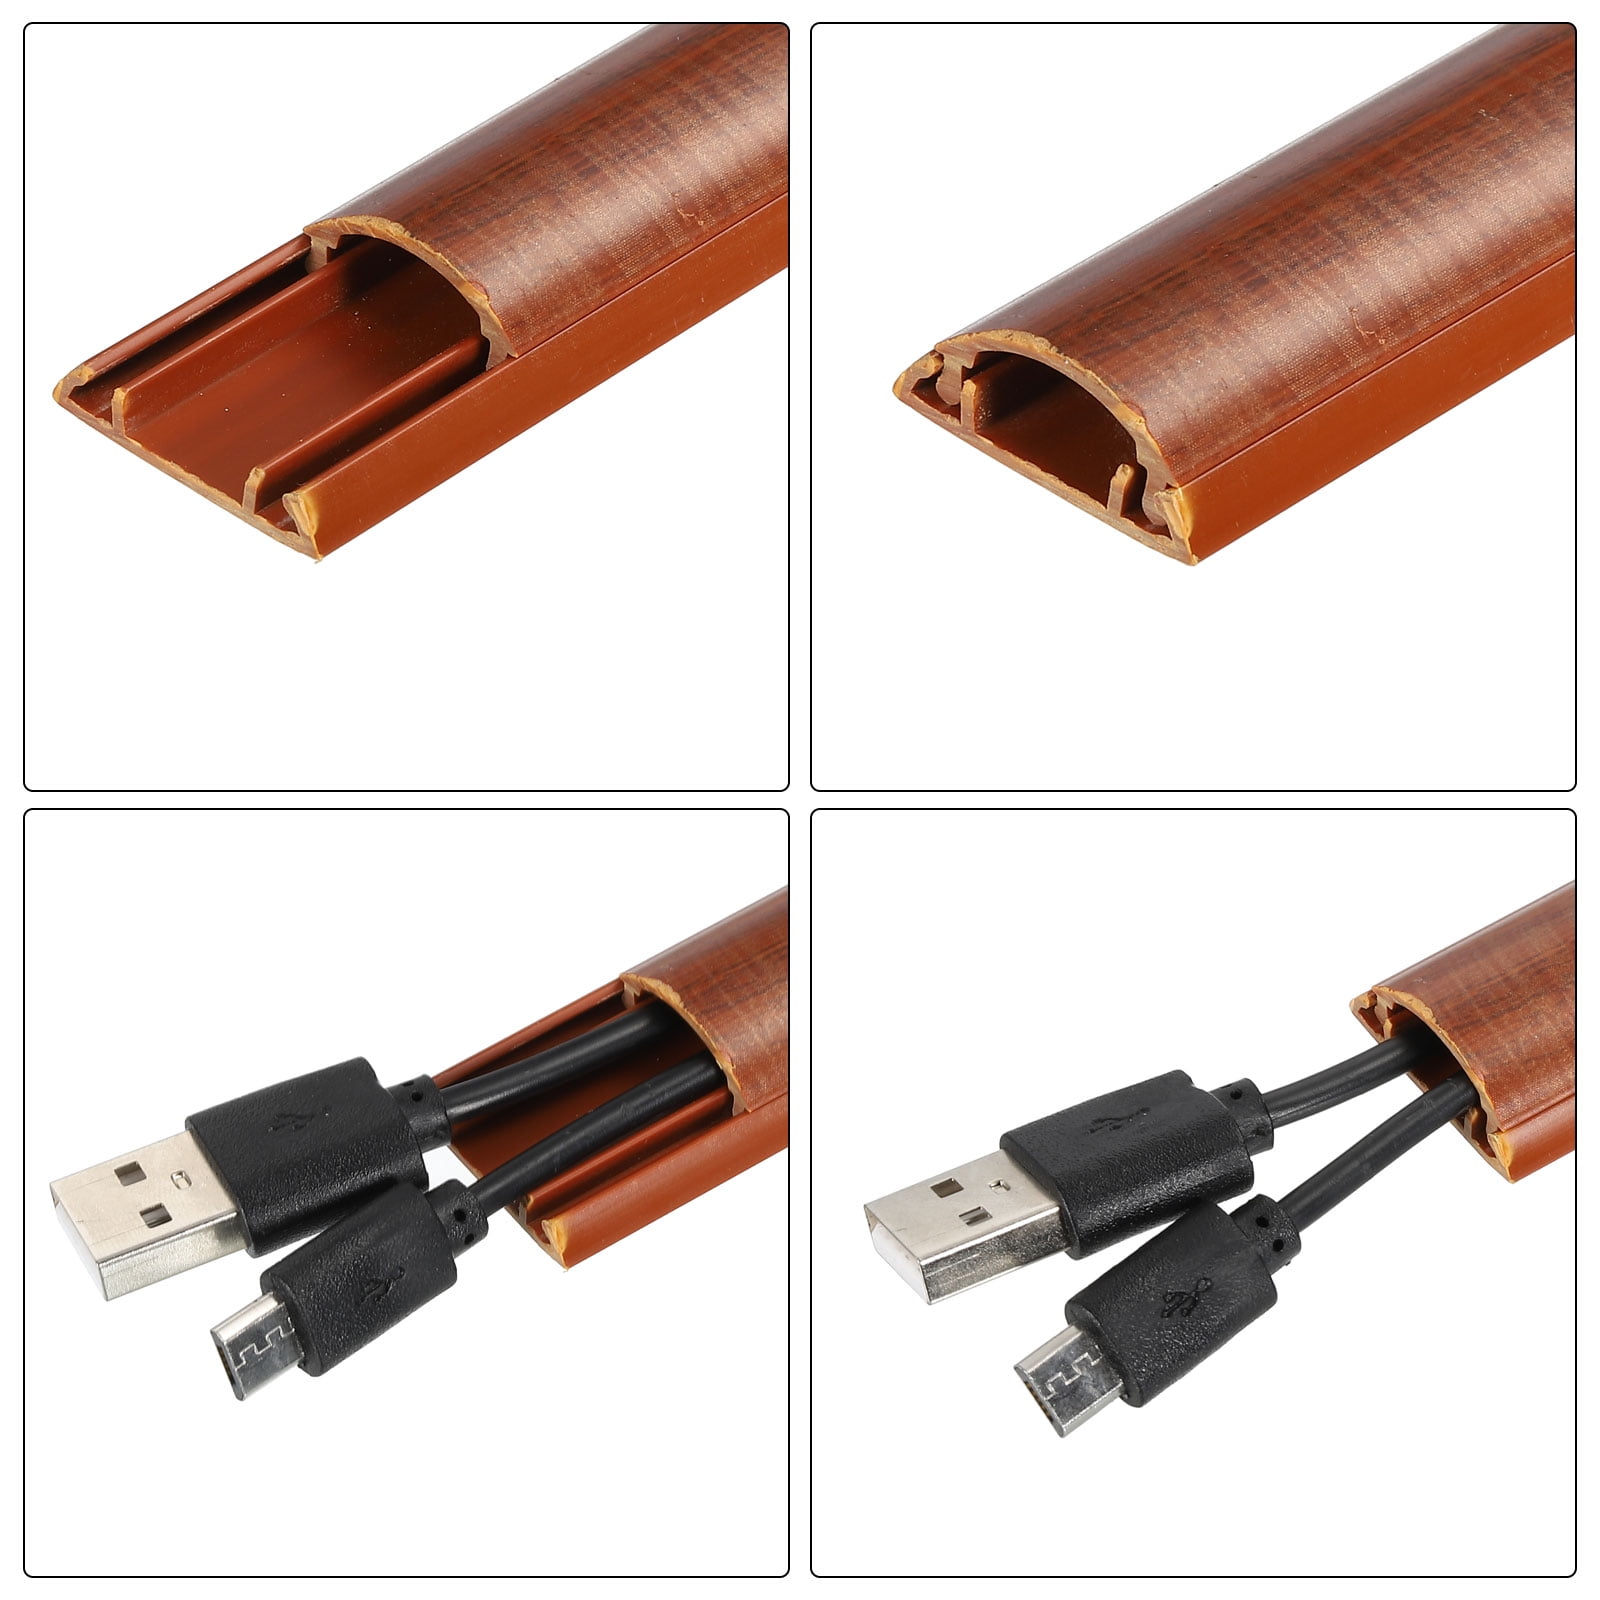 Uxcell Cable Raceway Cord Cover for Wall 39 inchLx1.2 inchWx0.4 inchh Cord Hider Channel Brown for TV Wire Management, Size: 15.7Lx1.26Wx0.5H